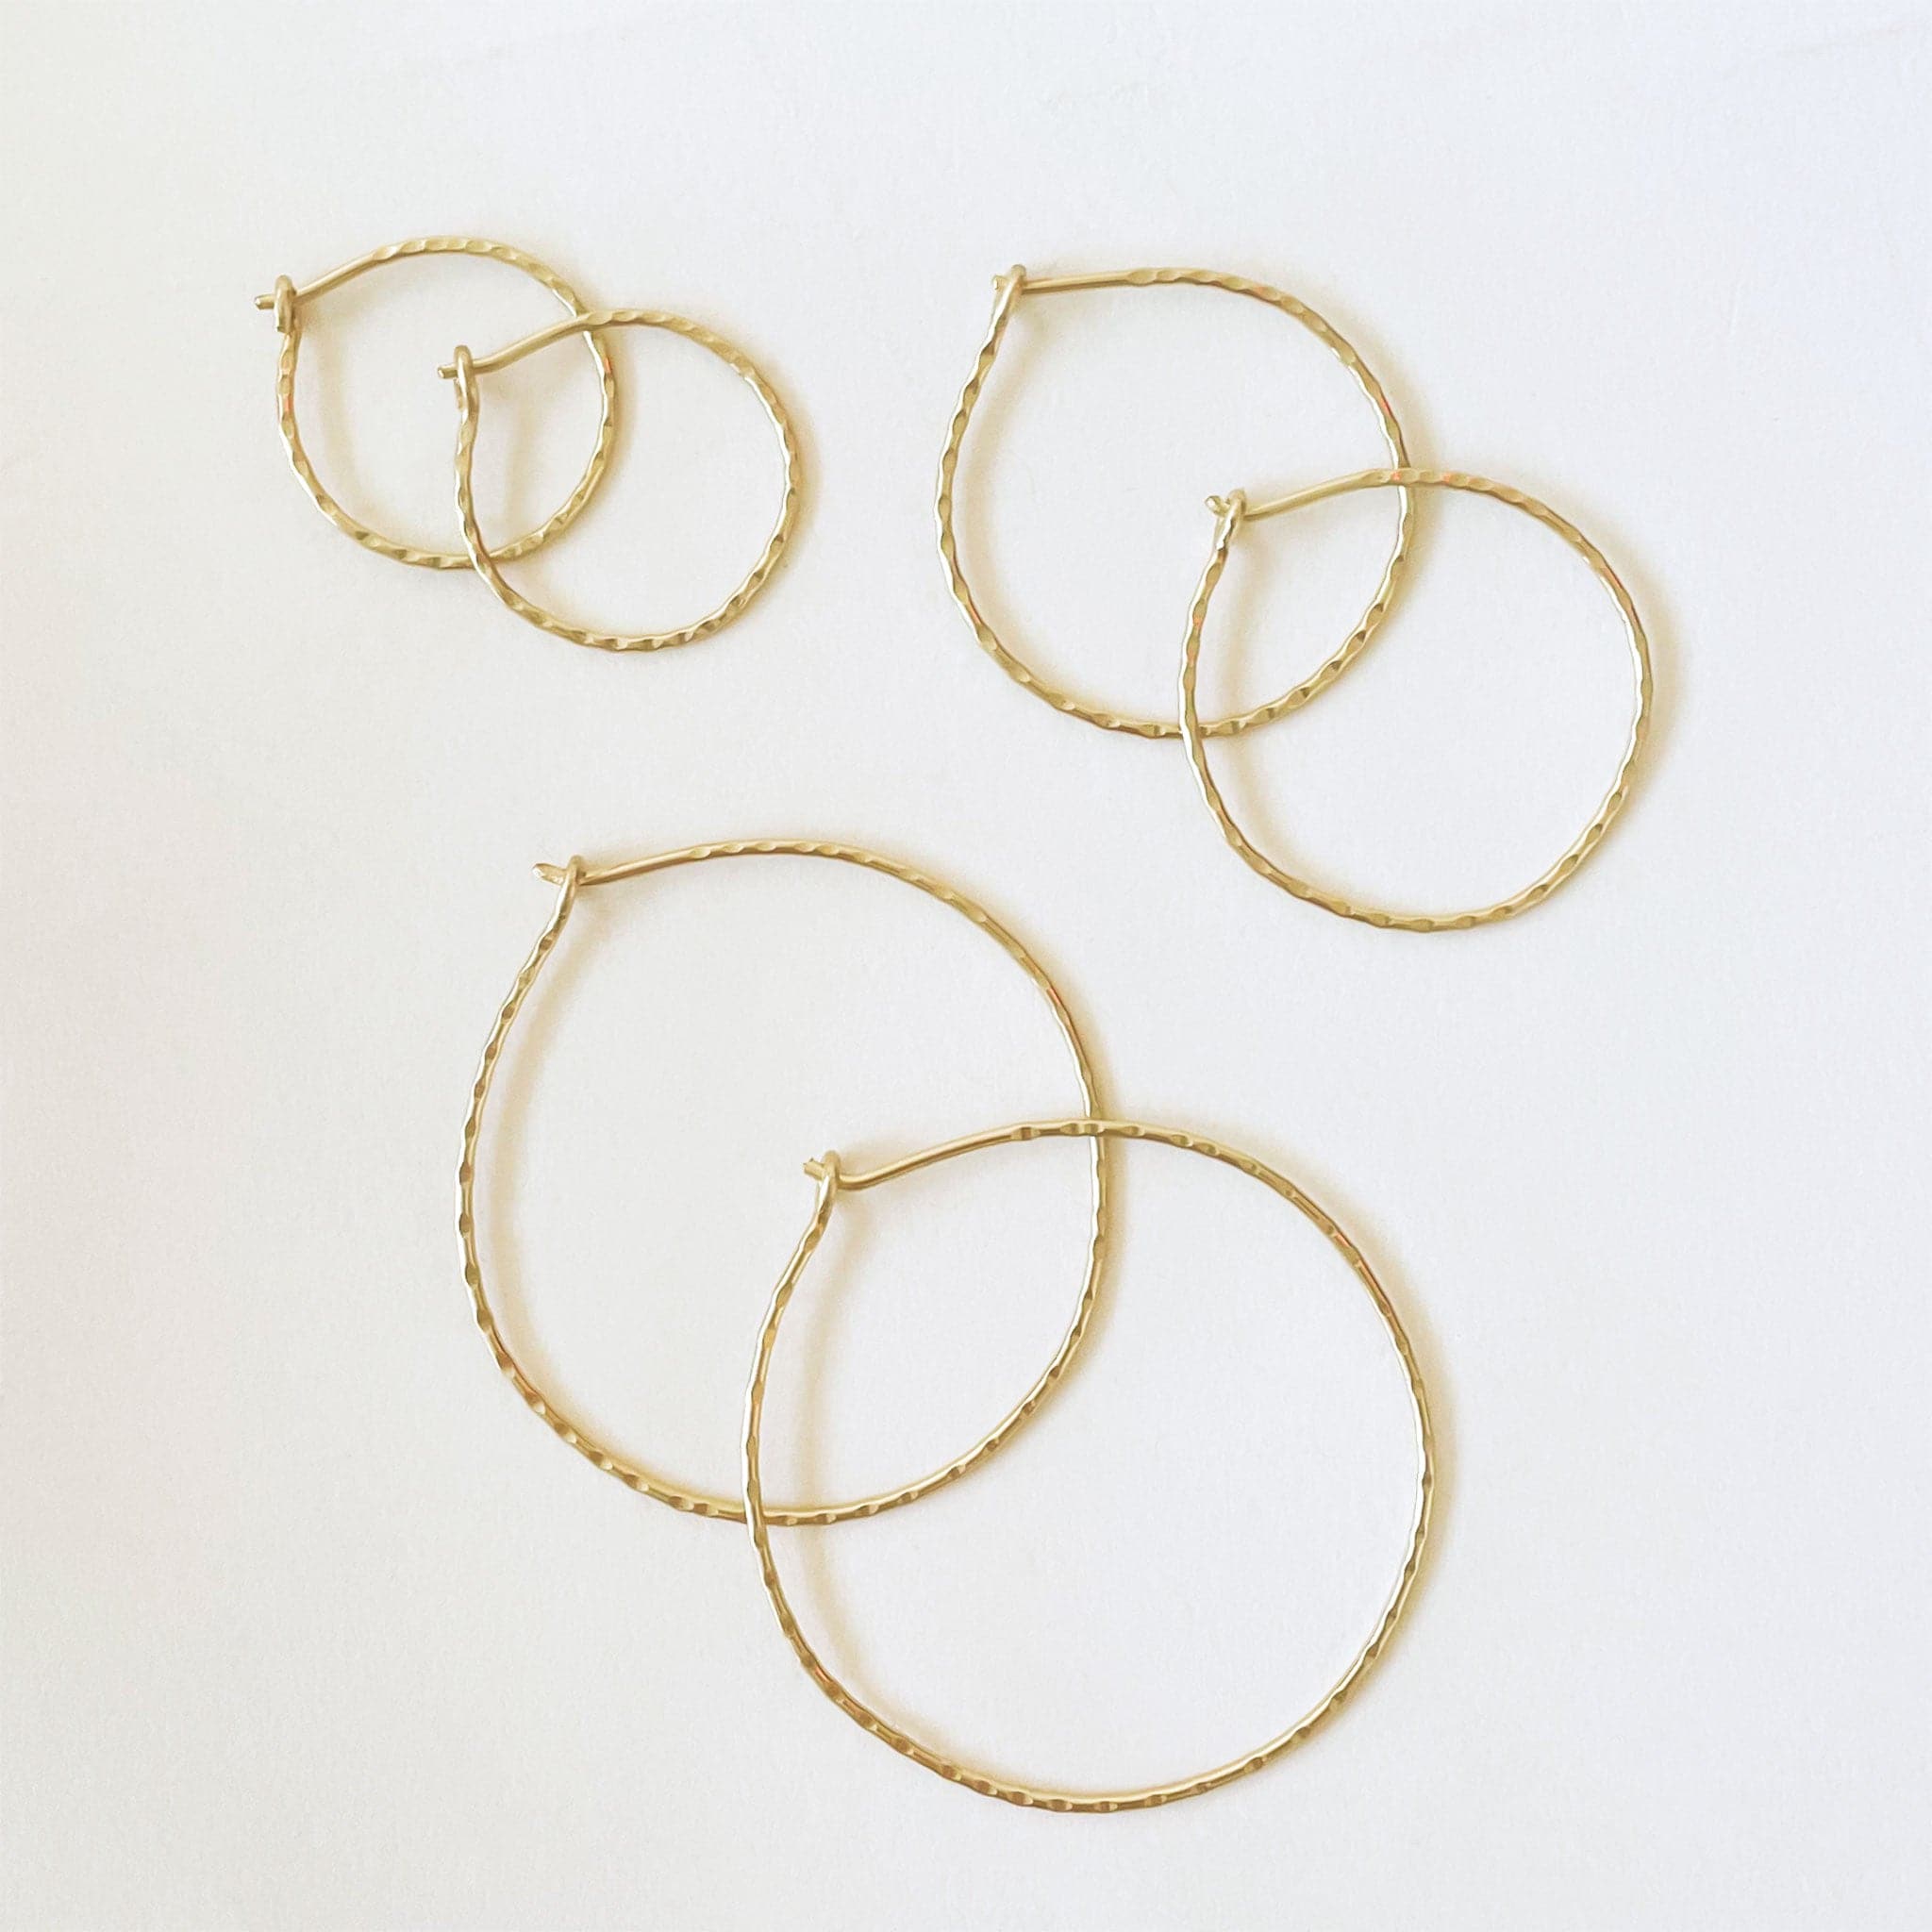 14k gold hammered hoops, shown here in the three sizes.